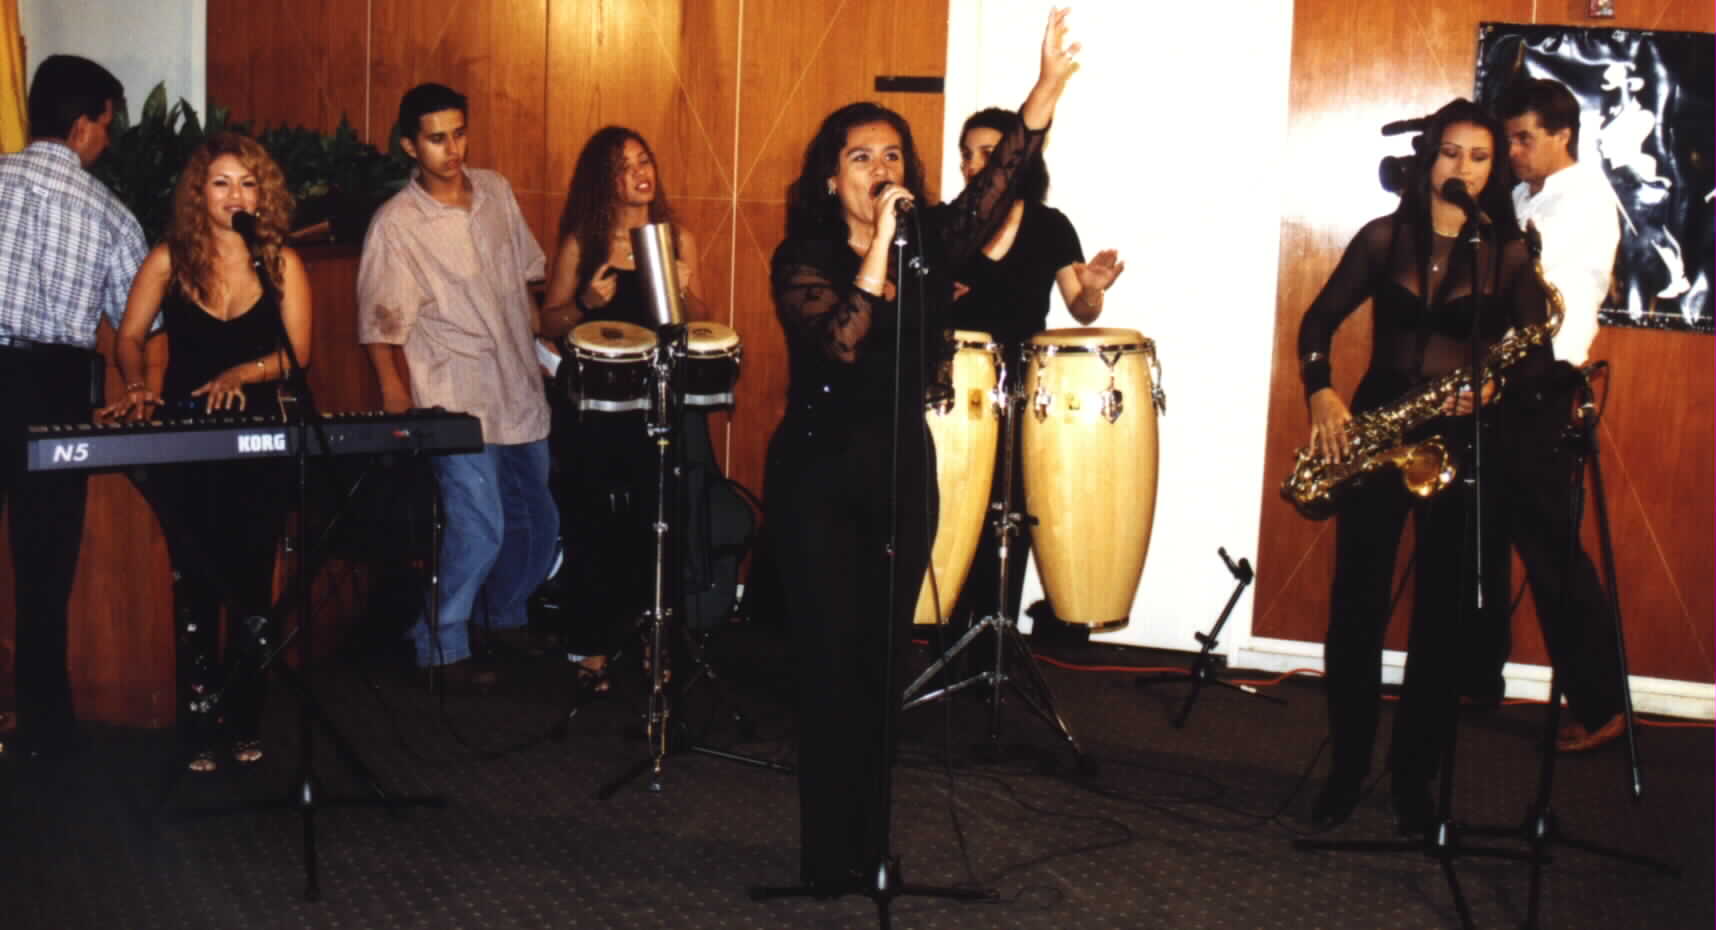 (Photographed by Noe Dorestant 7/20/2000: All women Caribbean band playing
lively Colombian music)If you copy for reuse, give credit where credit is due. 